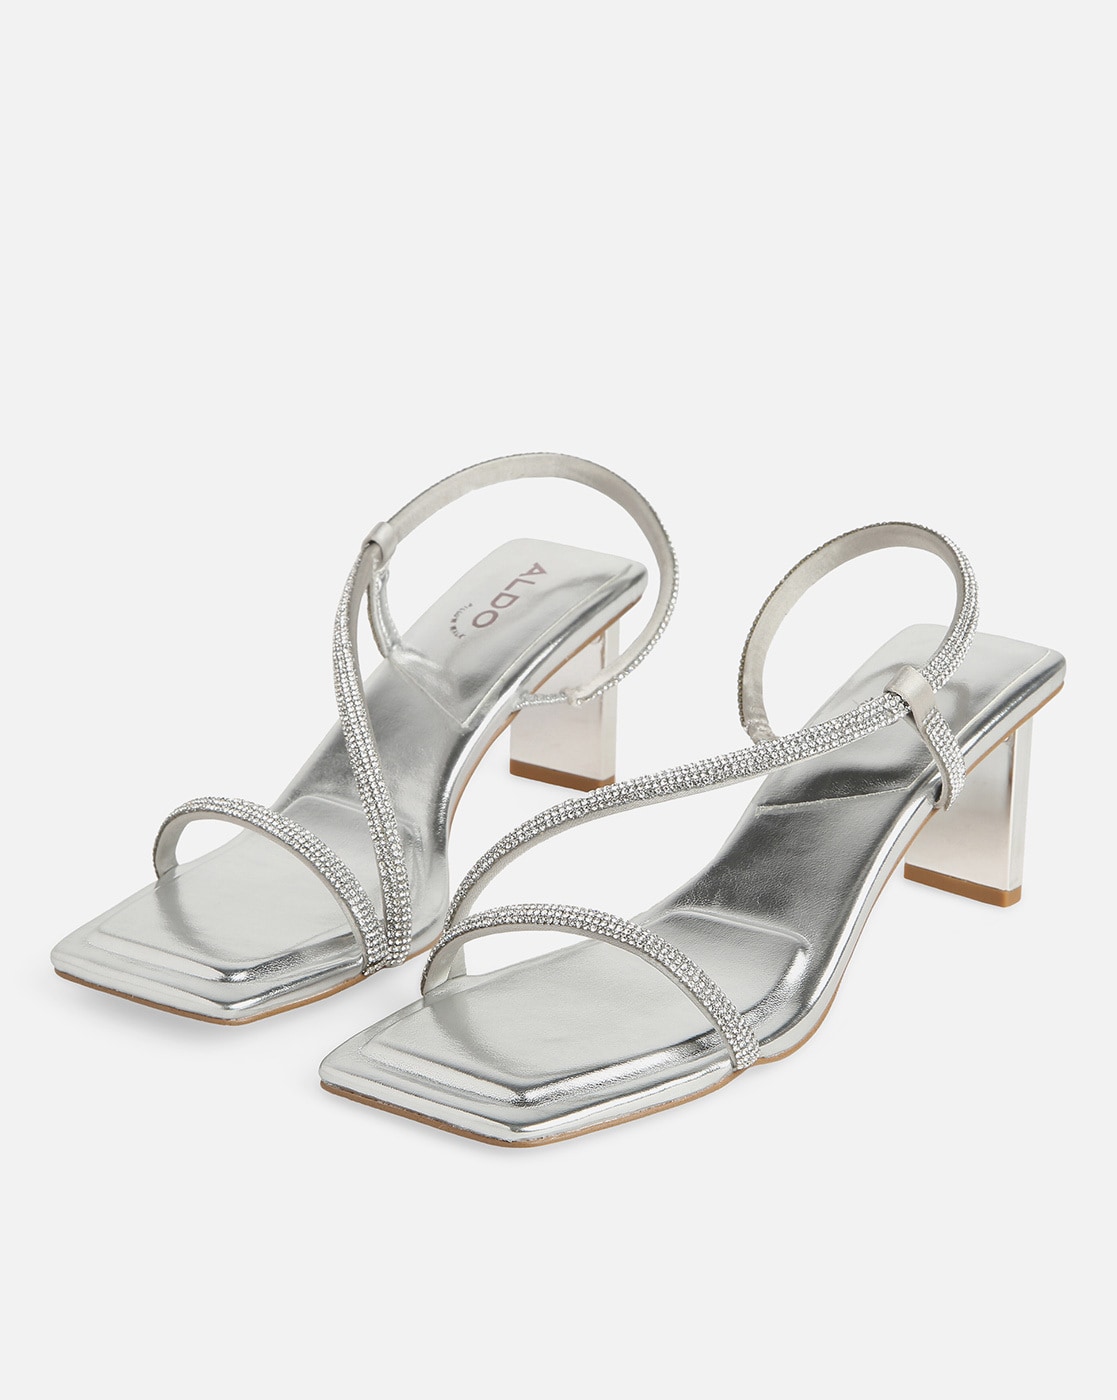 Fatima Strappy Block Heels With Glitter Detailed Straps in Silver | ikrush